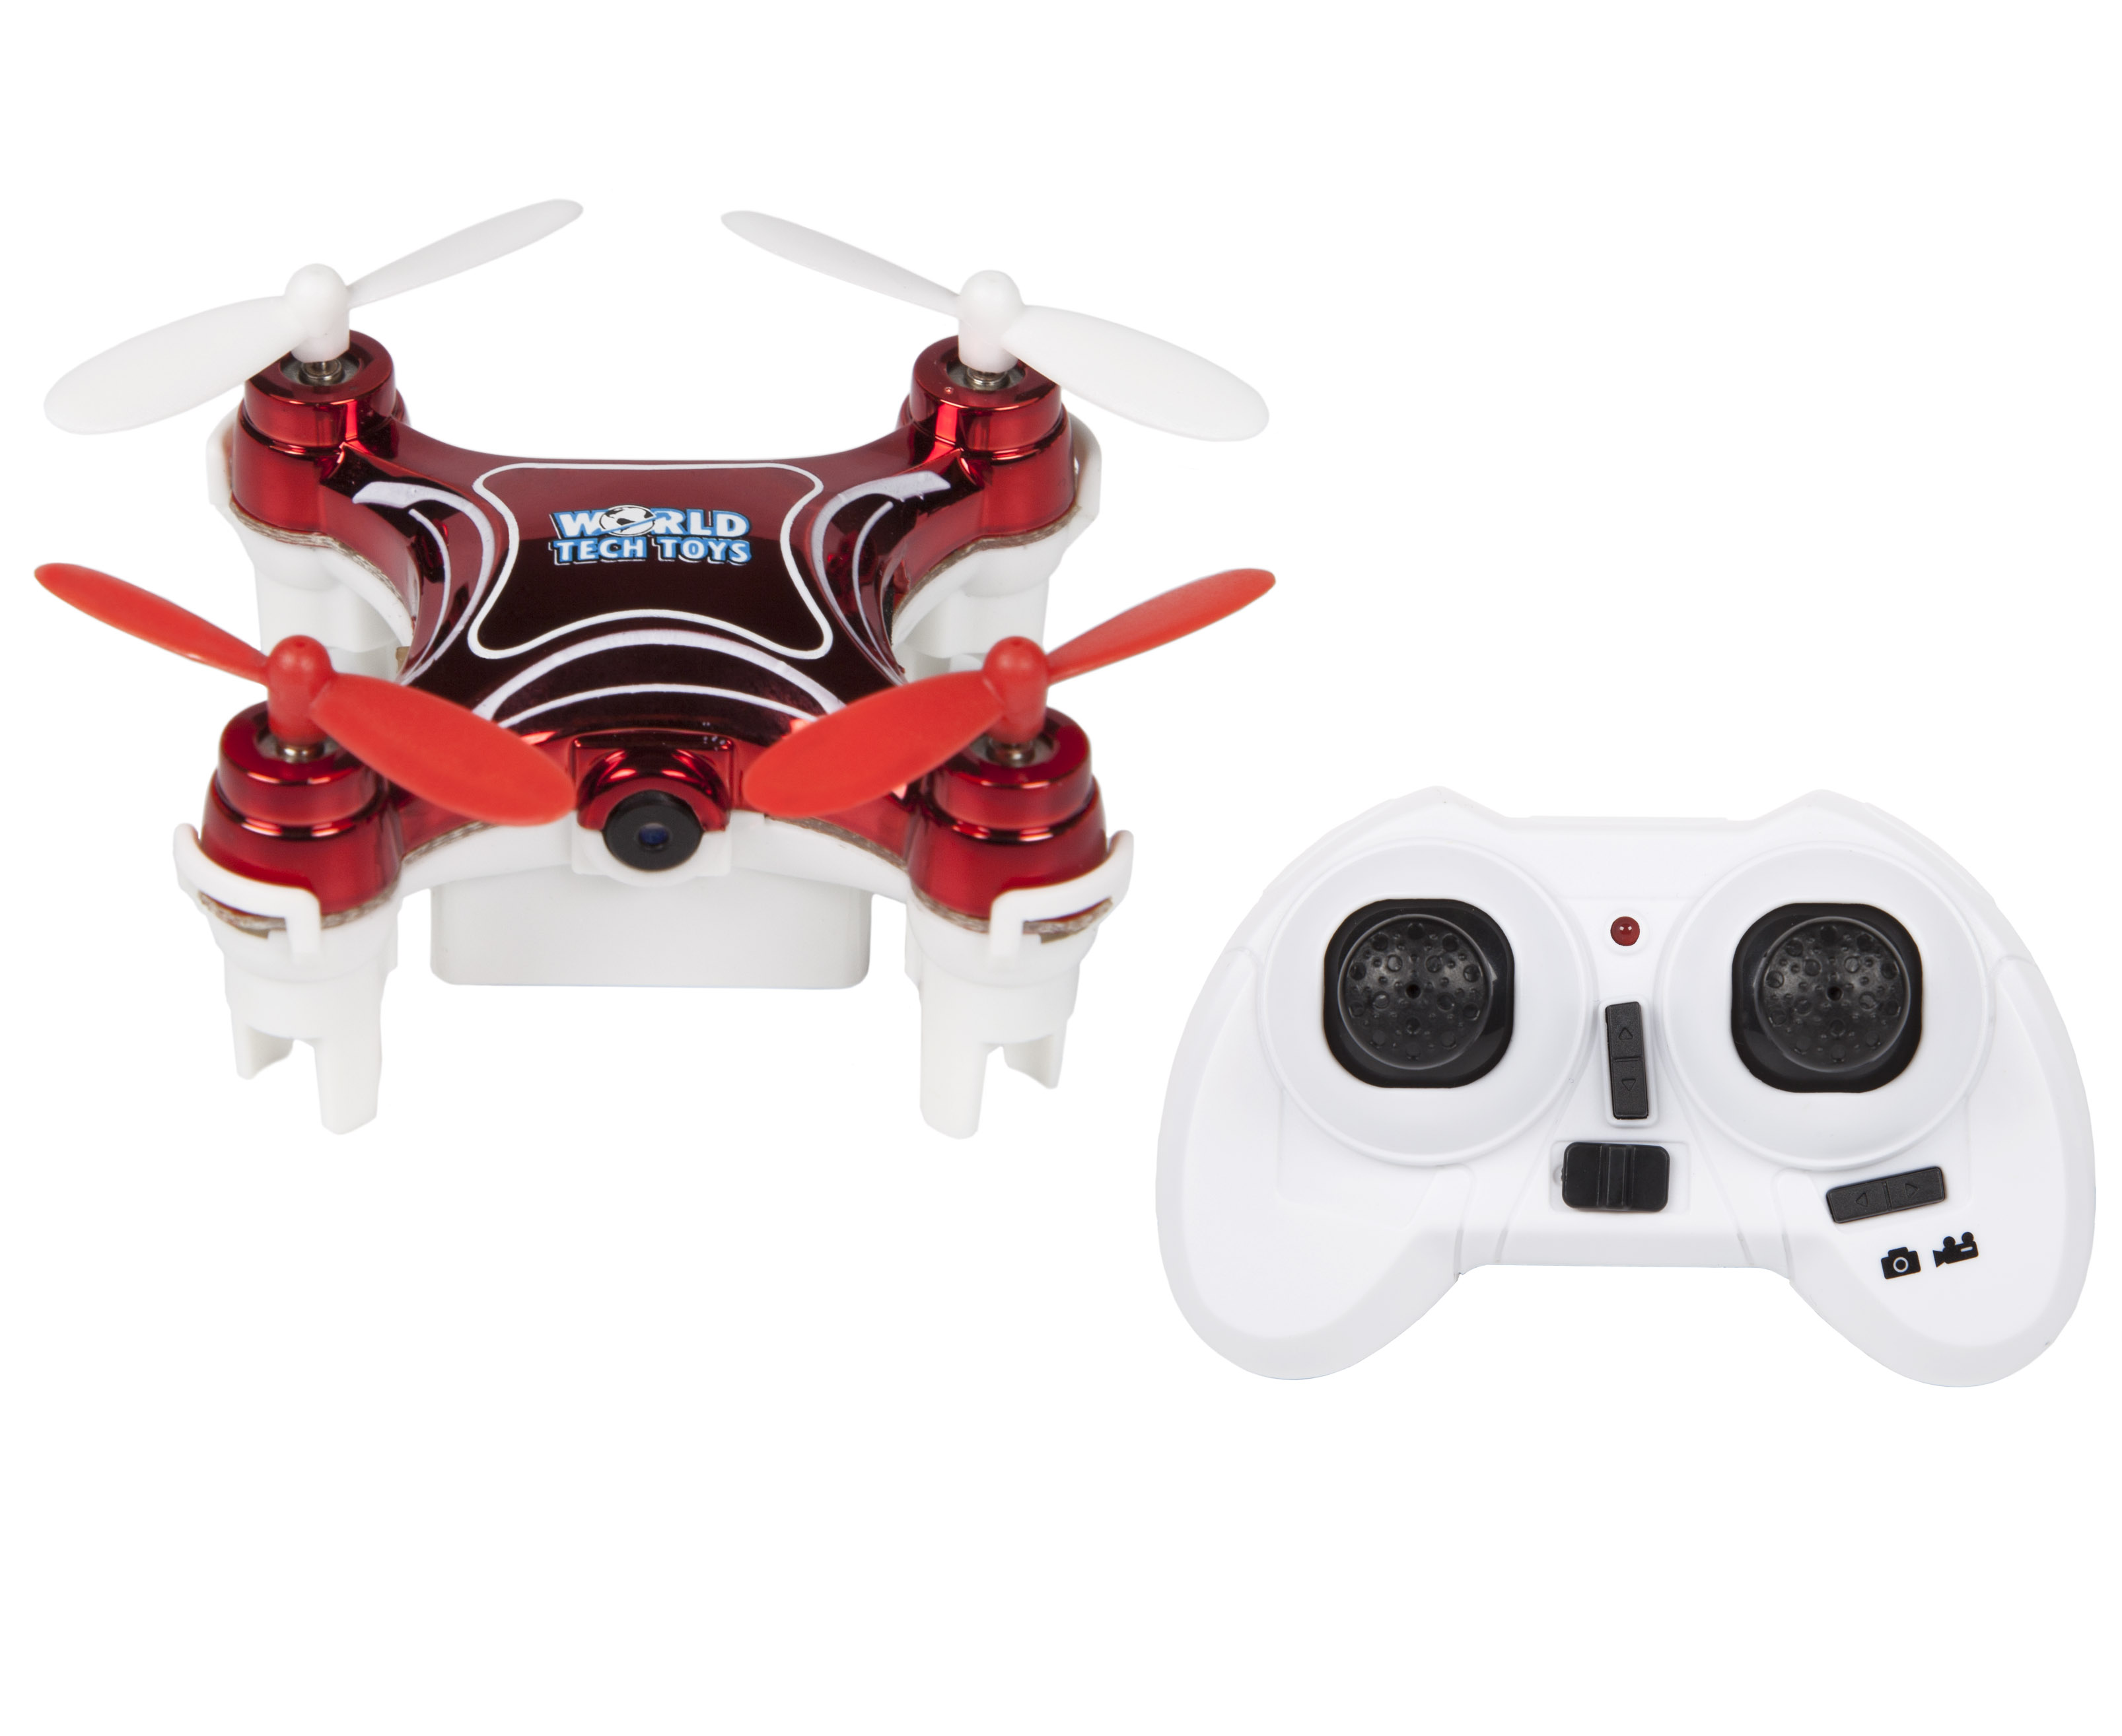 Nemo 2.4GHz 4.5-Channel Camera R/C Spy Drone(Colors may vary) - image 2 of 4